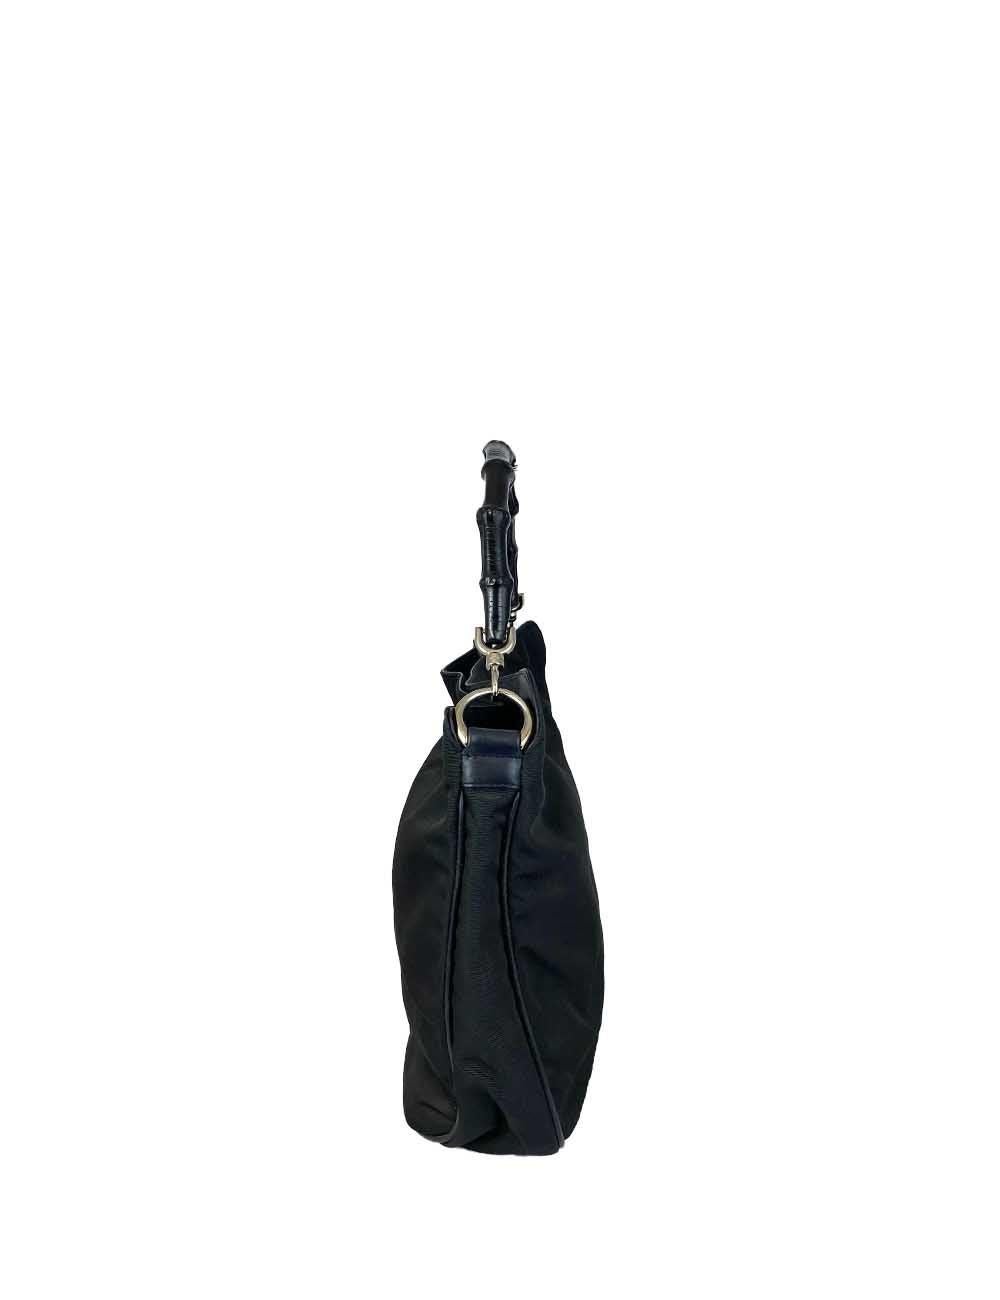 Black nylon Gucci handle bag with black bamboo handle and silver hardware. One zipper pocket on the inside and leather bottom. 

Additional information:
Material: Nylon
Hardware: Silver
Measurements: 30 W x 5 D x 26 H cm
Handle Drop: 13 cm 
Overall